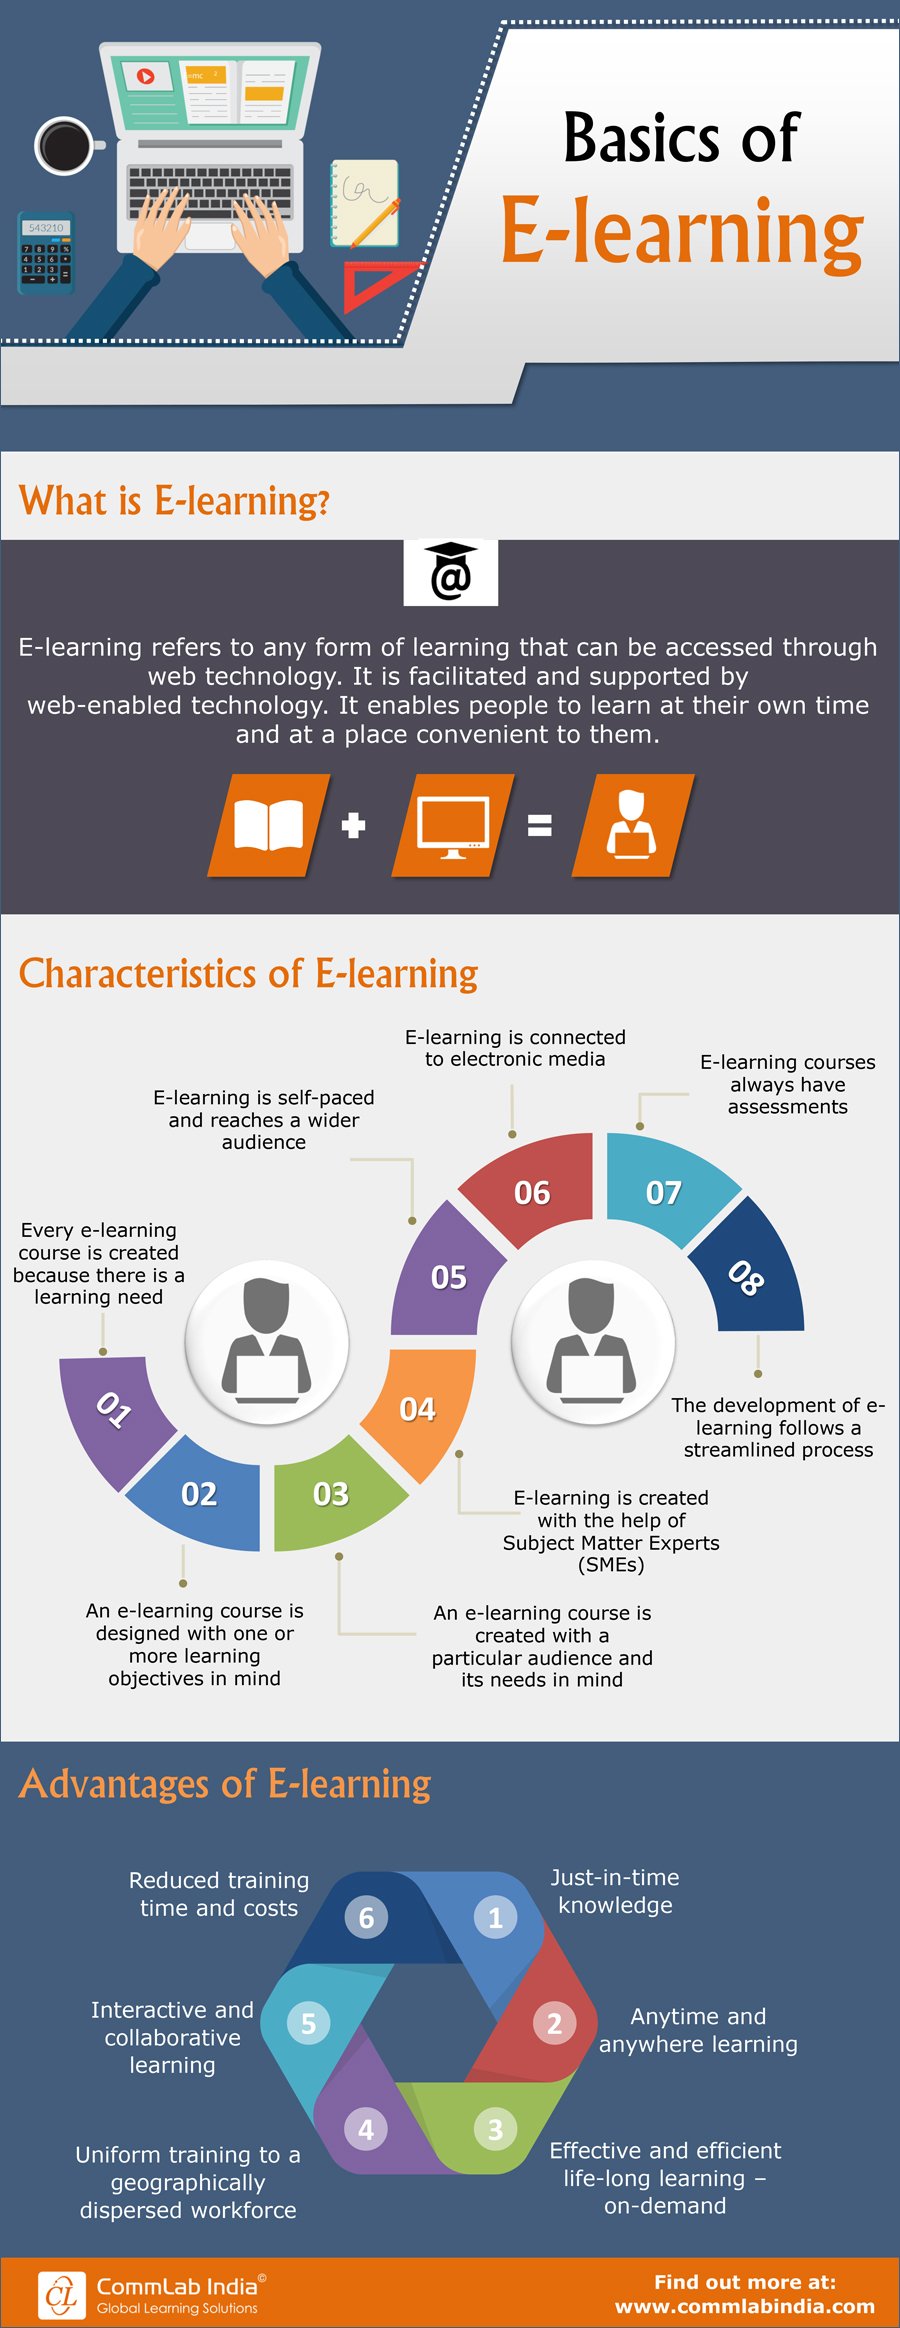 What is E-learning: Its Characteristics and Advantages [Infographic]